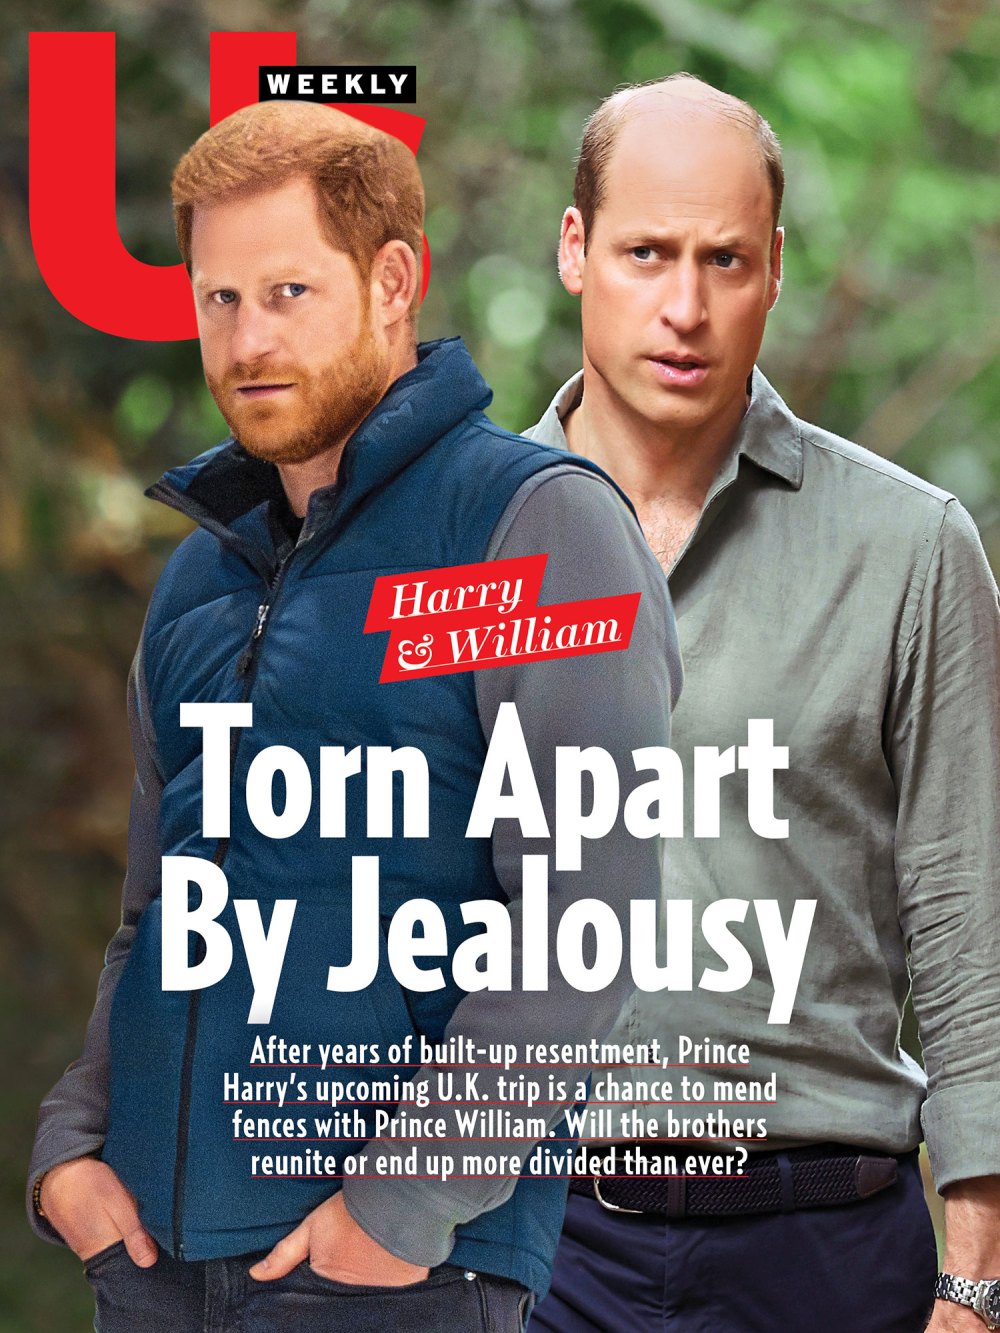 Prince Harry and Prince William Us Weekly 2420 No Chip